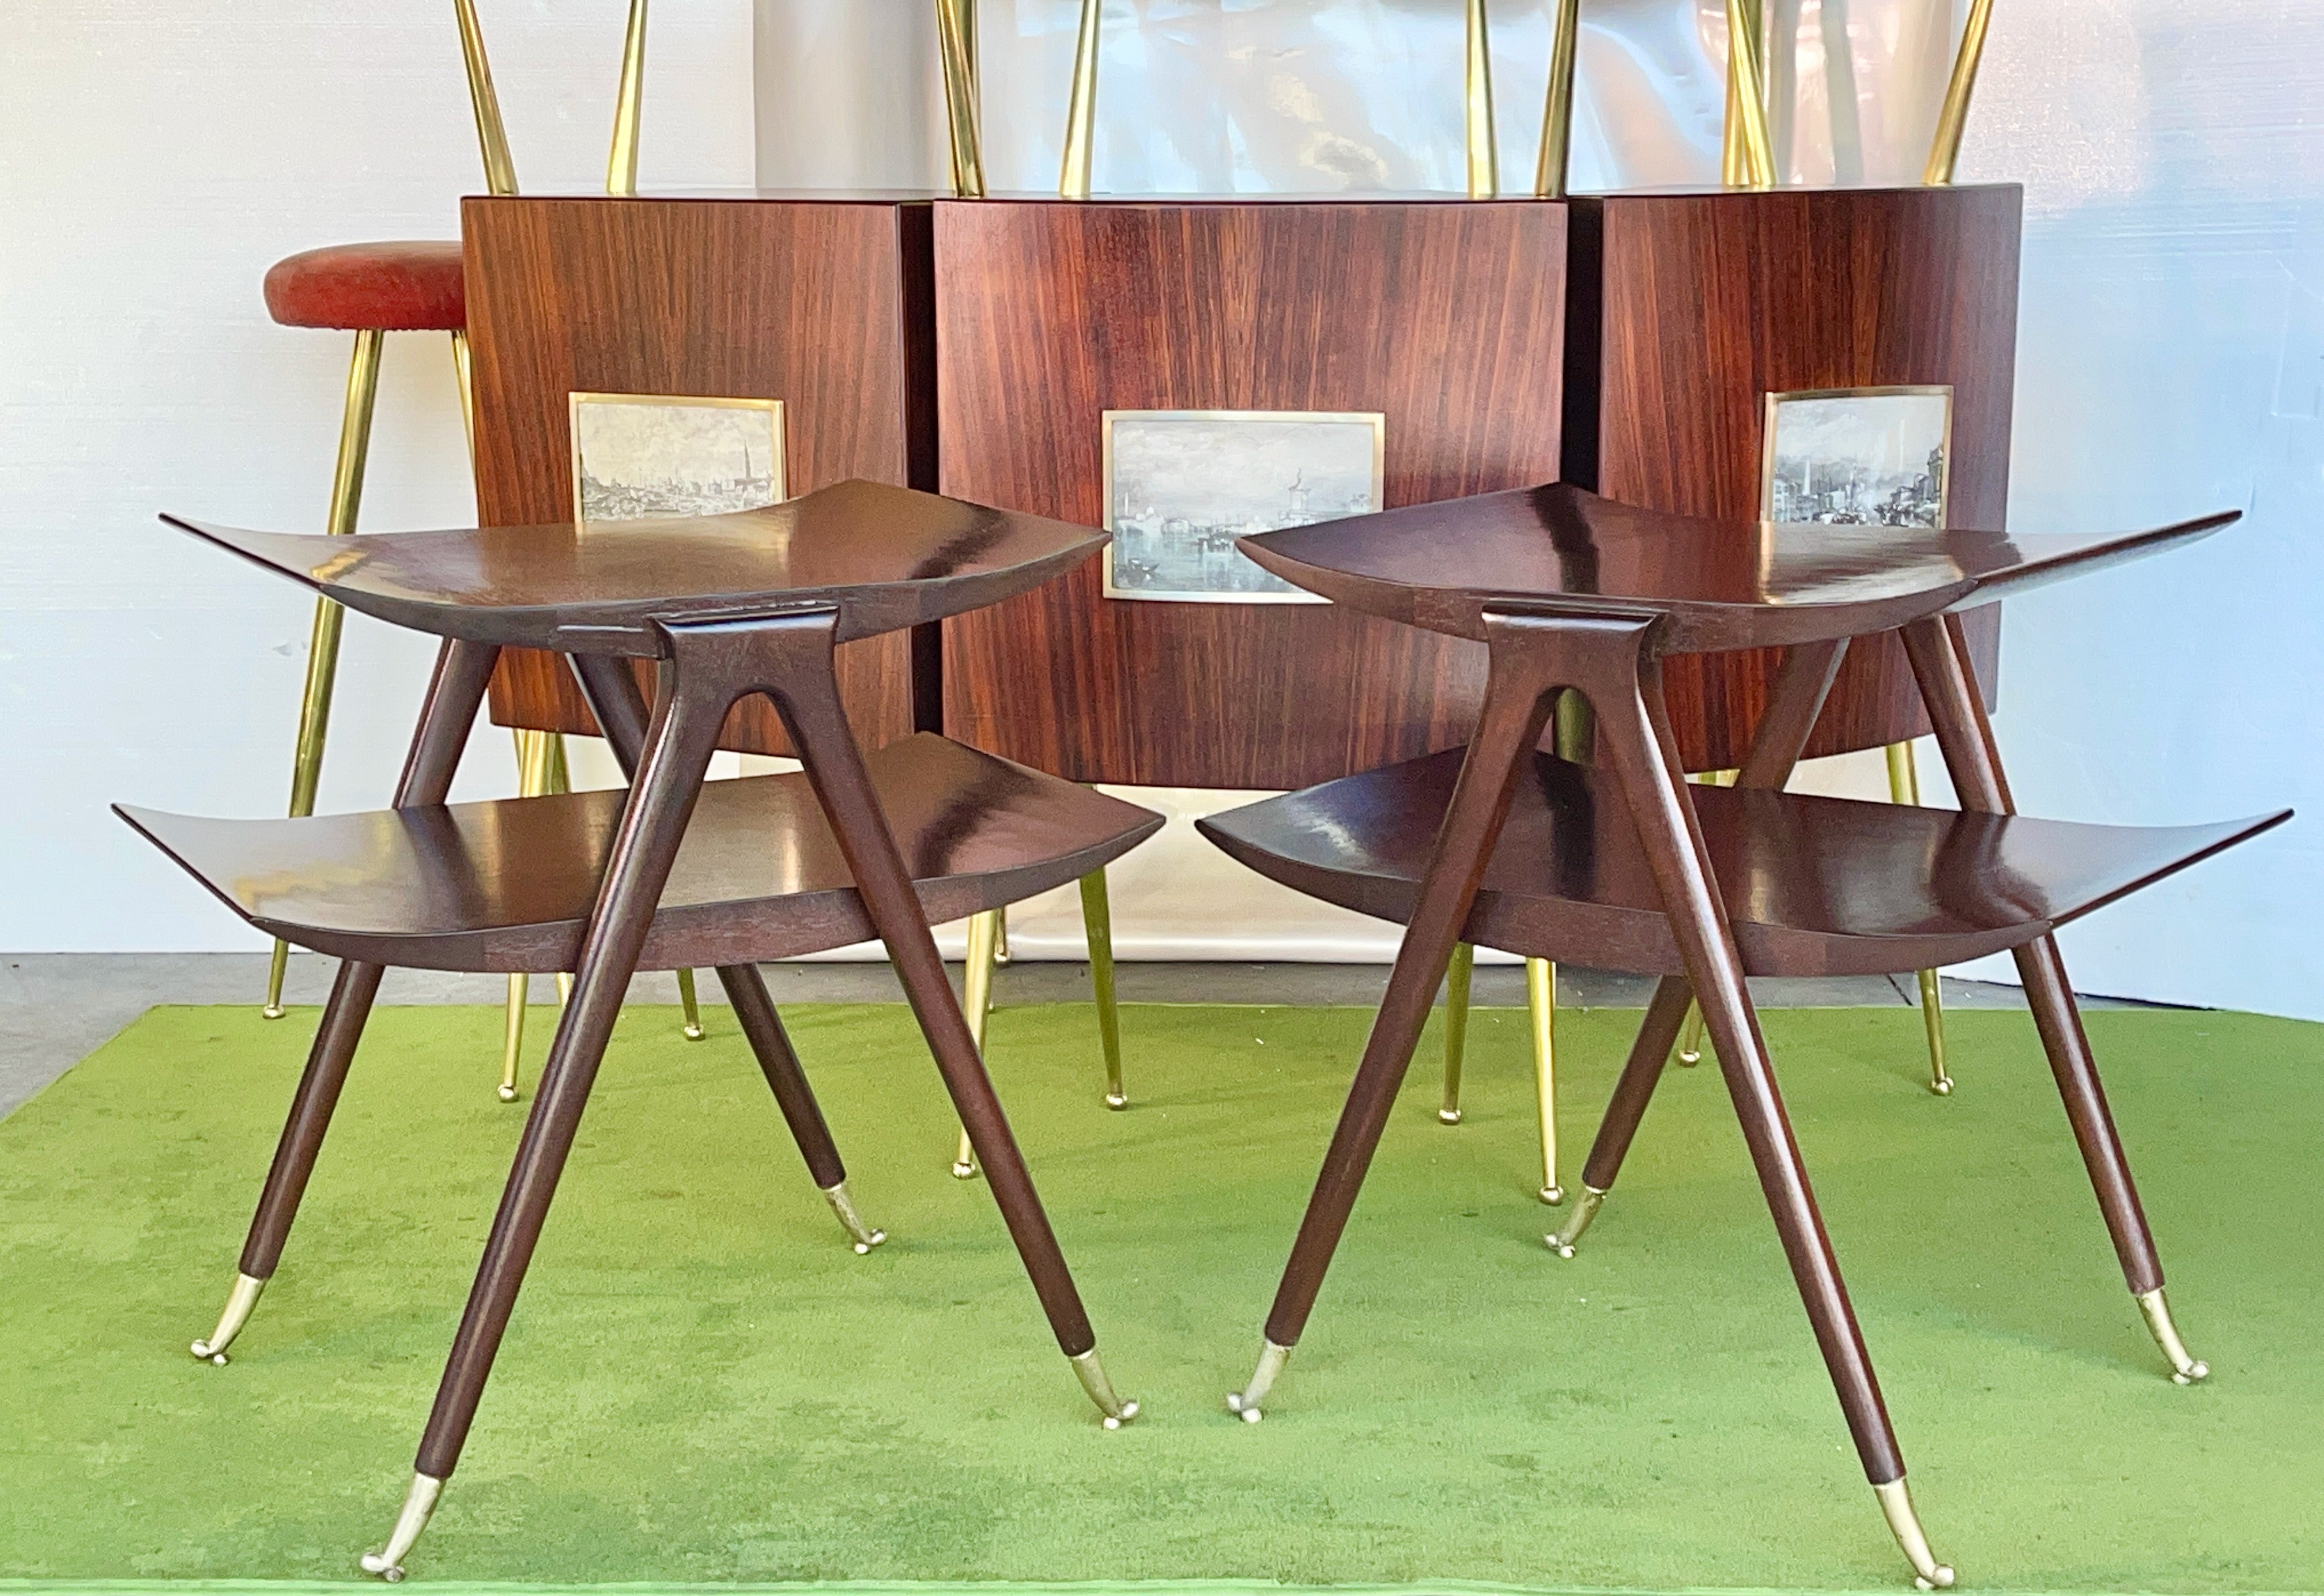 Dramatic vintage pair of bi-level tables in the style of Ico and Luisa Parisi. 
Finely constructed of walnut hardwood and veneer, both tiers feature upswept ends and are supported by strikingly elegant tapered legs which stand on dainty solid brass